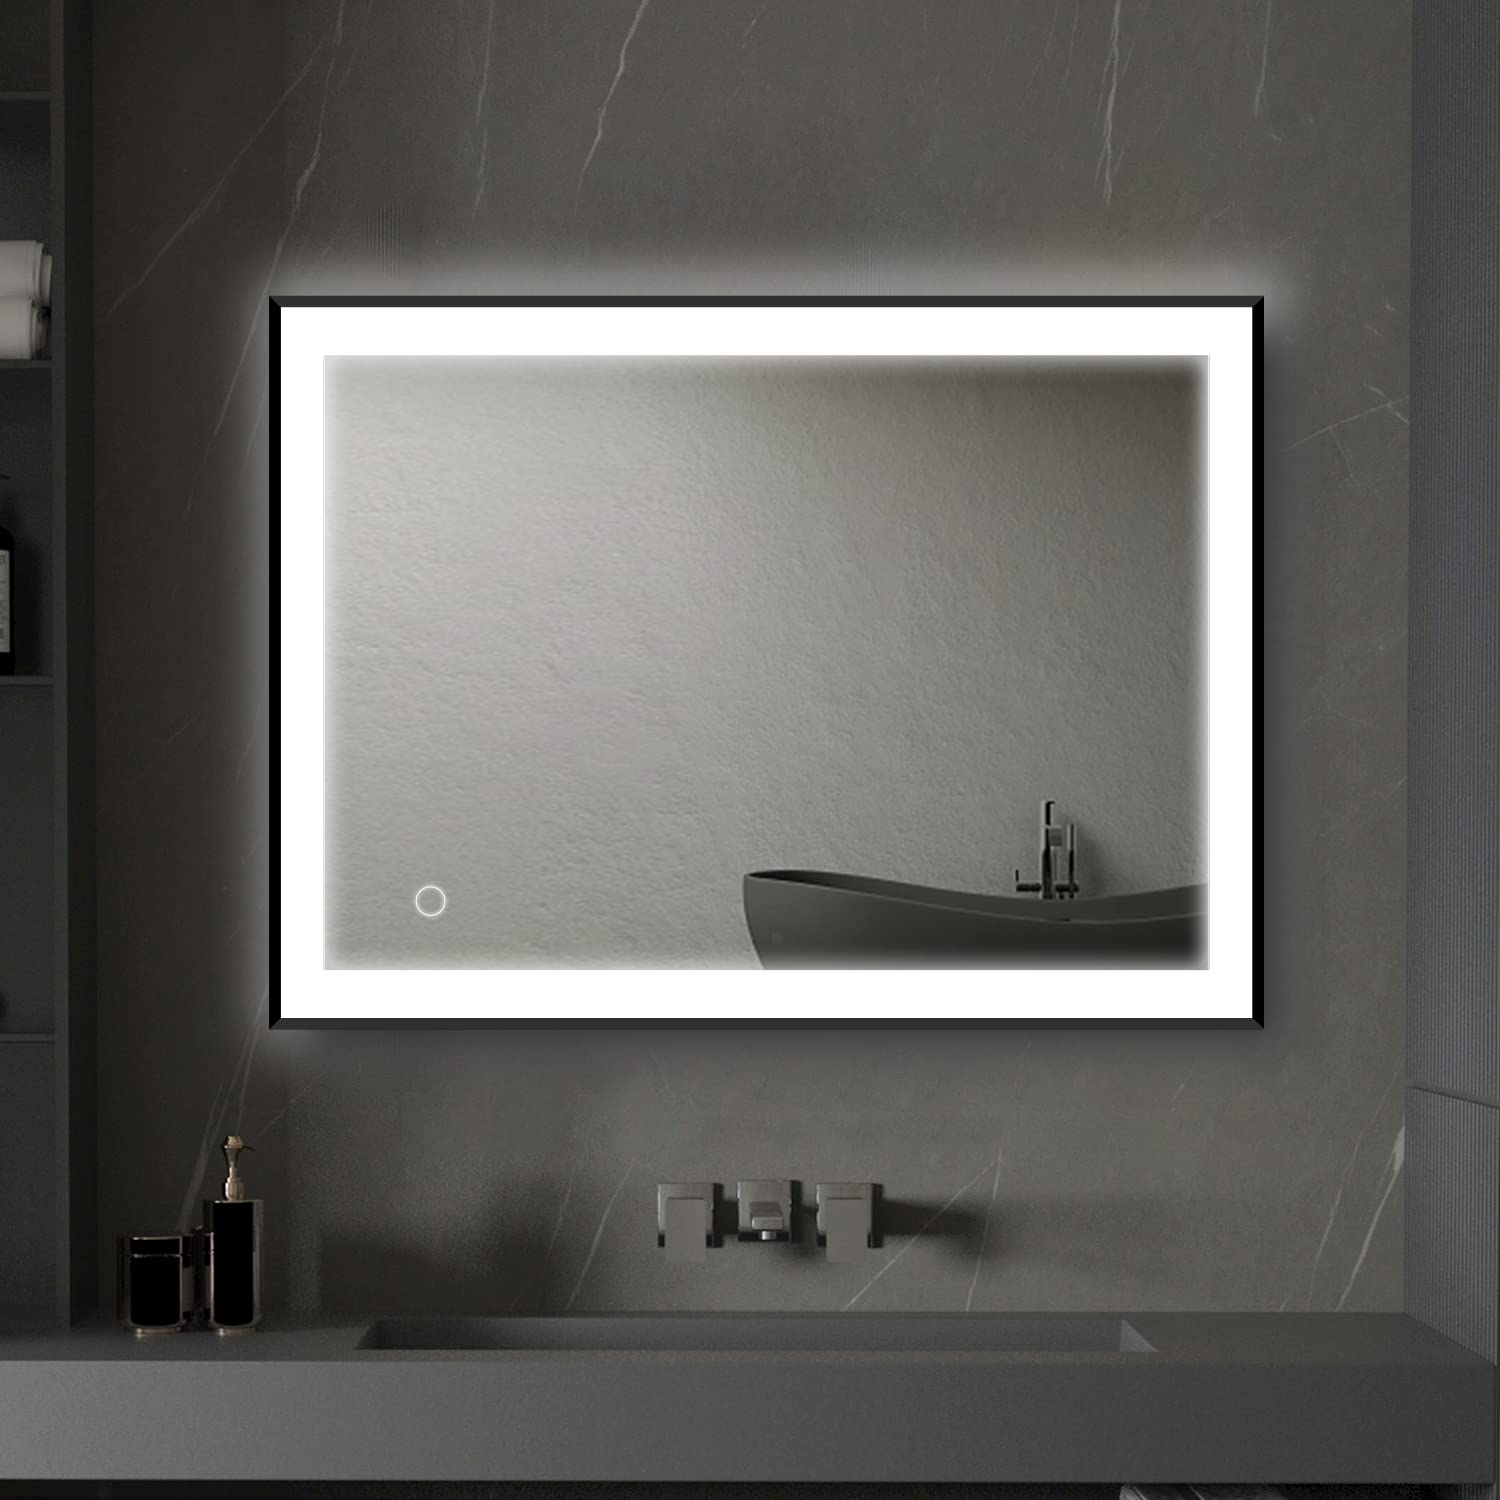 UNIQUE PLUS LIFE 20 x 28 Inch LED Bathroom Mirror with Lights, Anti-Fog Mirror for Bathroom, Black Framed Bathroom Vanity Mirror with Touch Button, Dimmable Lights Makeup Mirror, CRI 90+